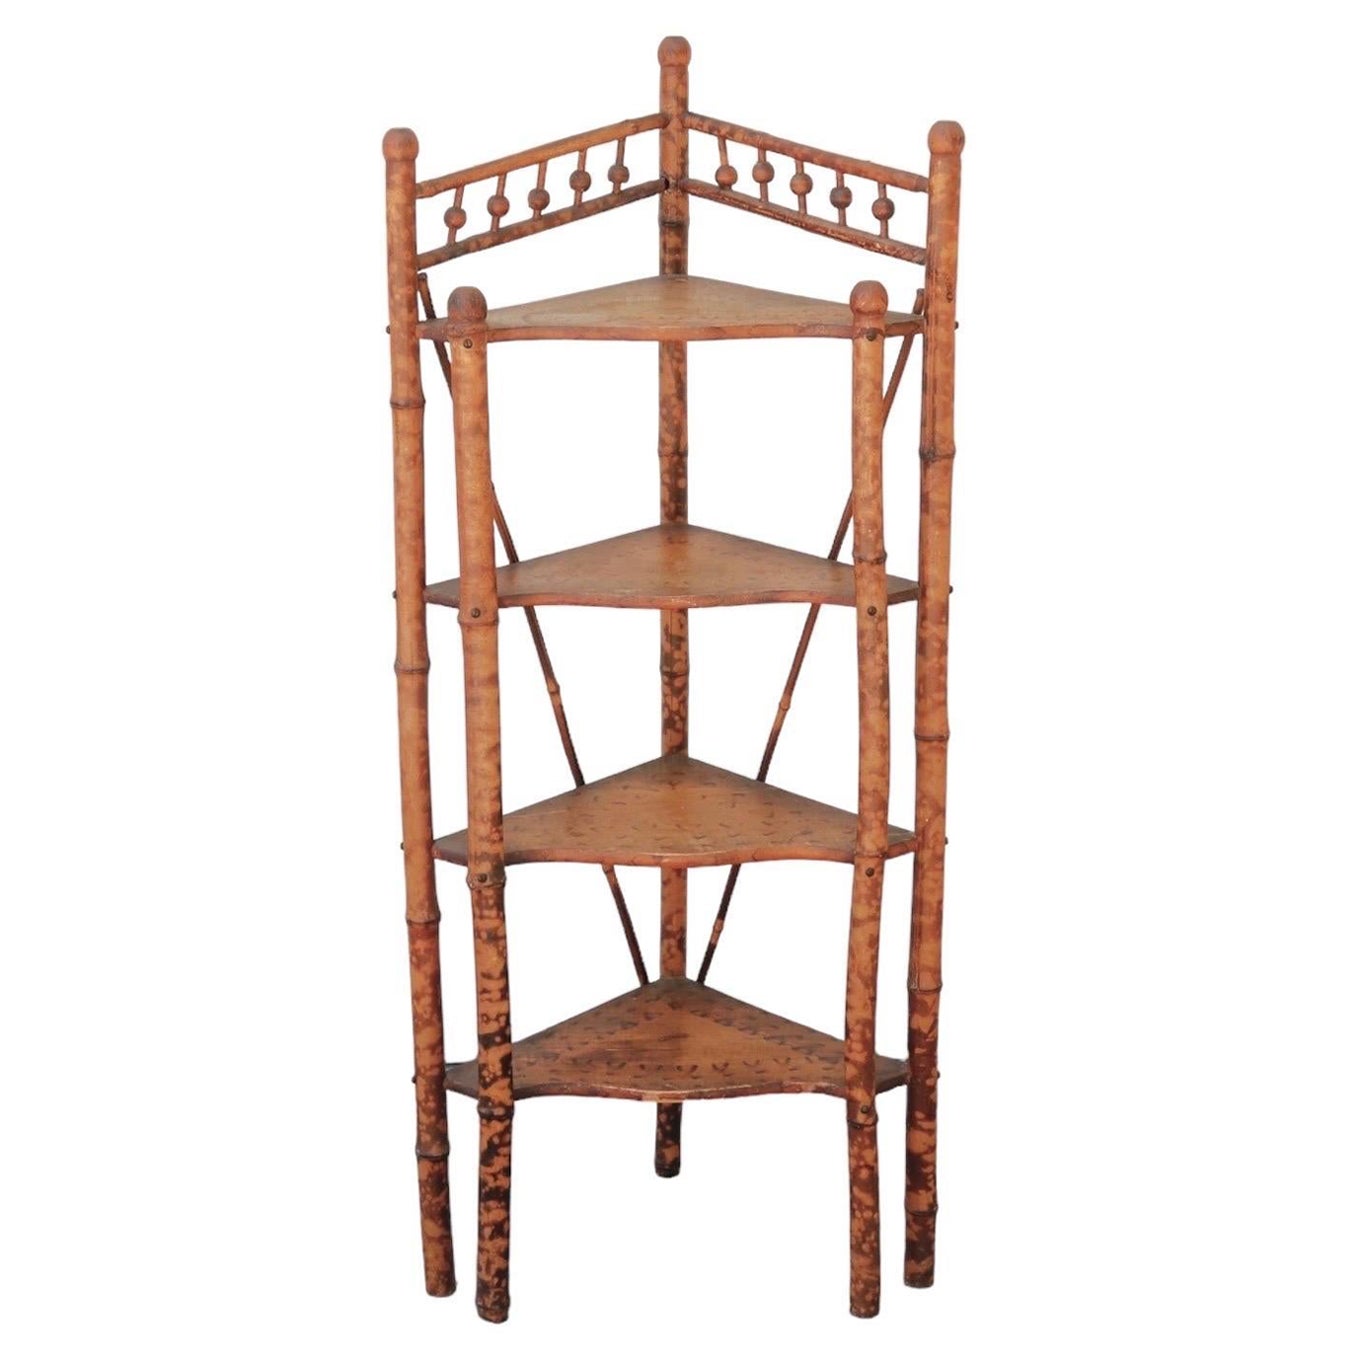 Antique Bamboo Corner Etagere For Sale